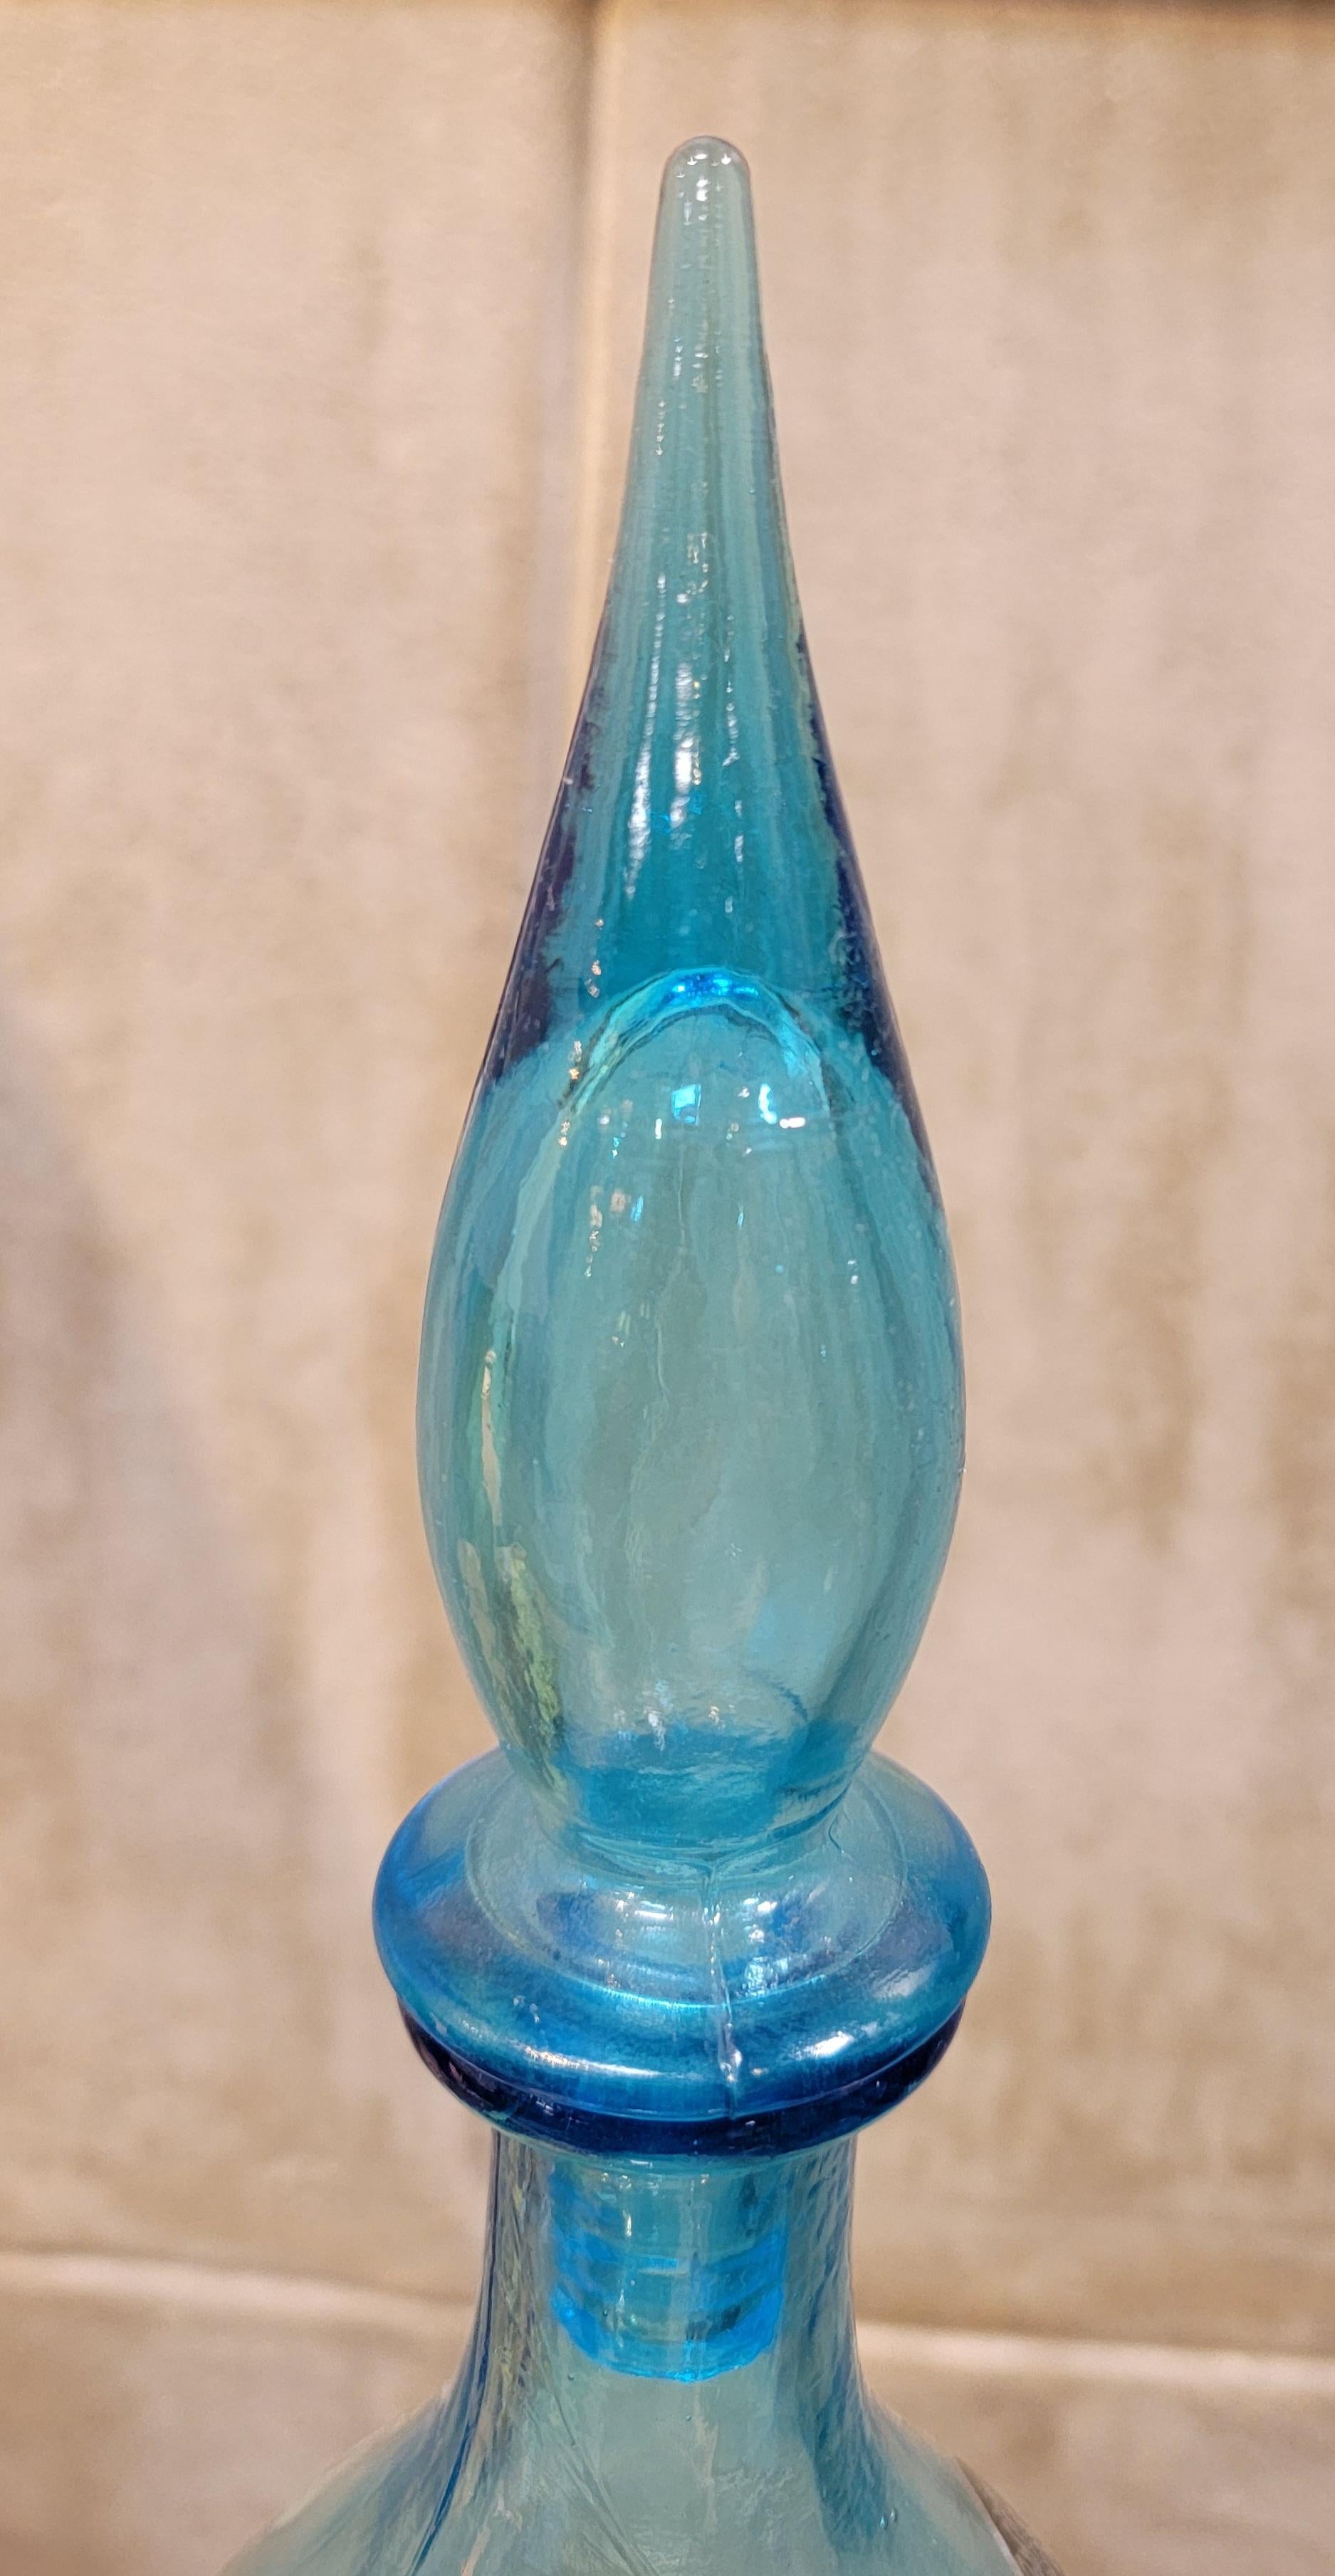 Mid-Century Modern Empoli Rossini Blown Glass Decanter with Stopper For Sale